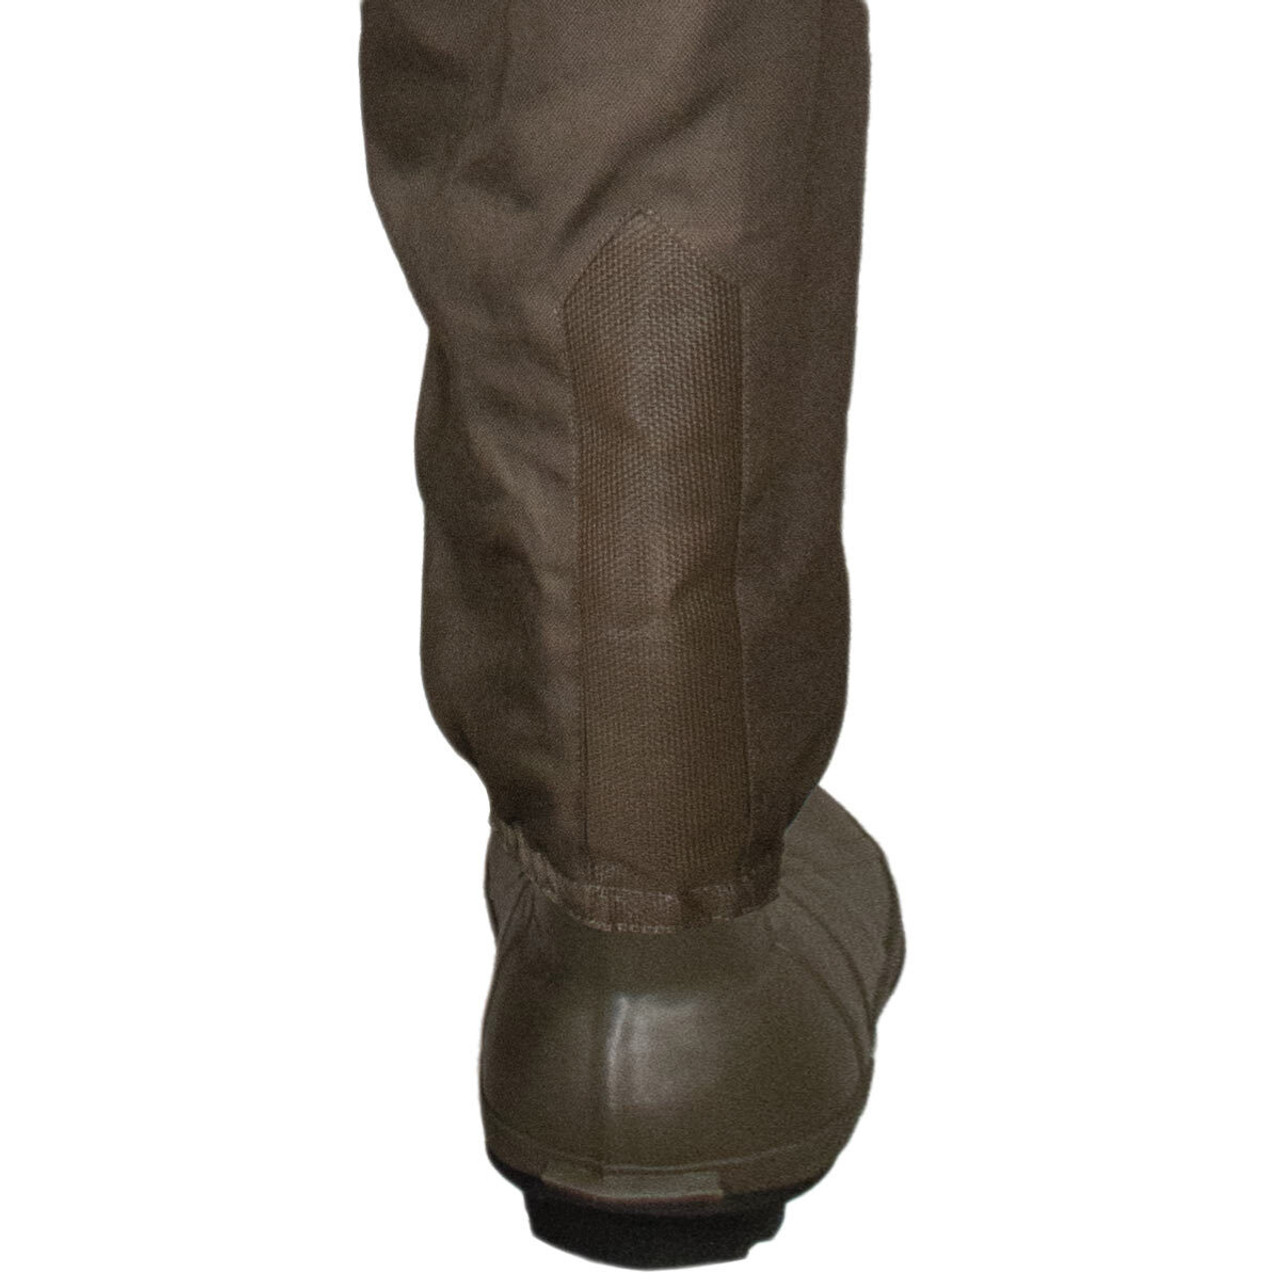 Rogers Toughman 2-IN-1 Insulated Breathable Wader